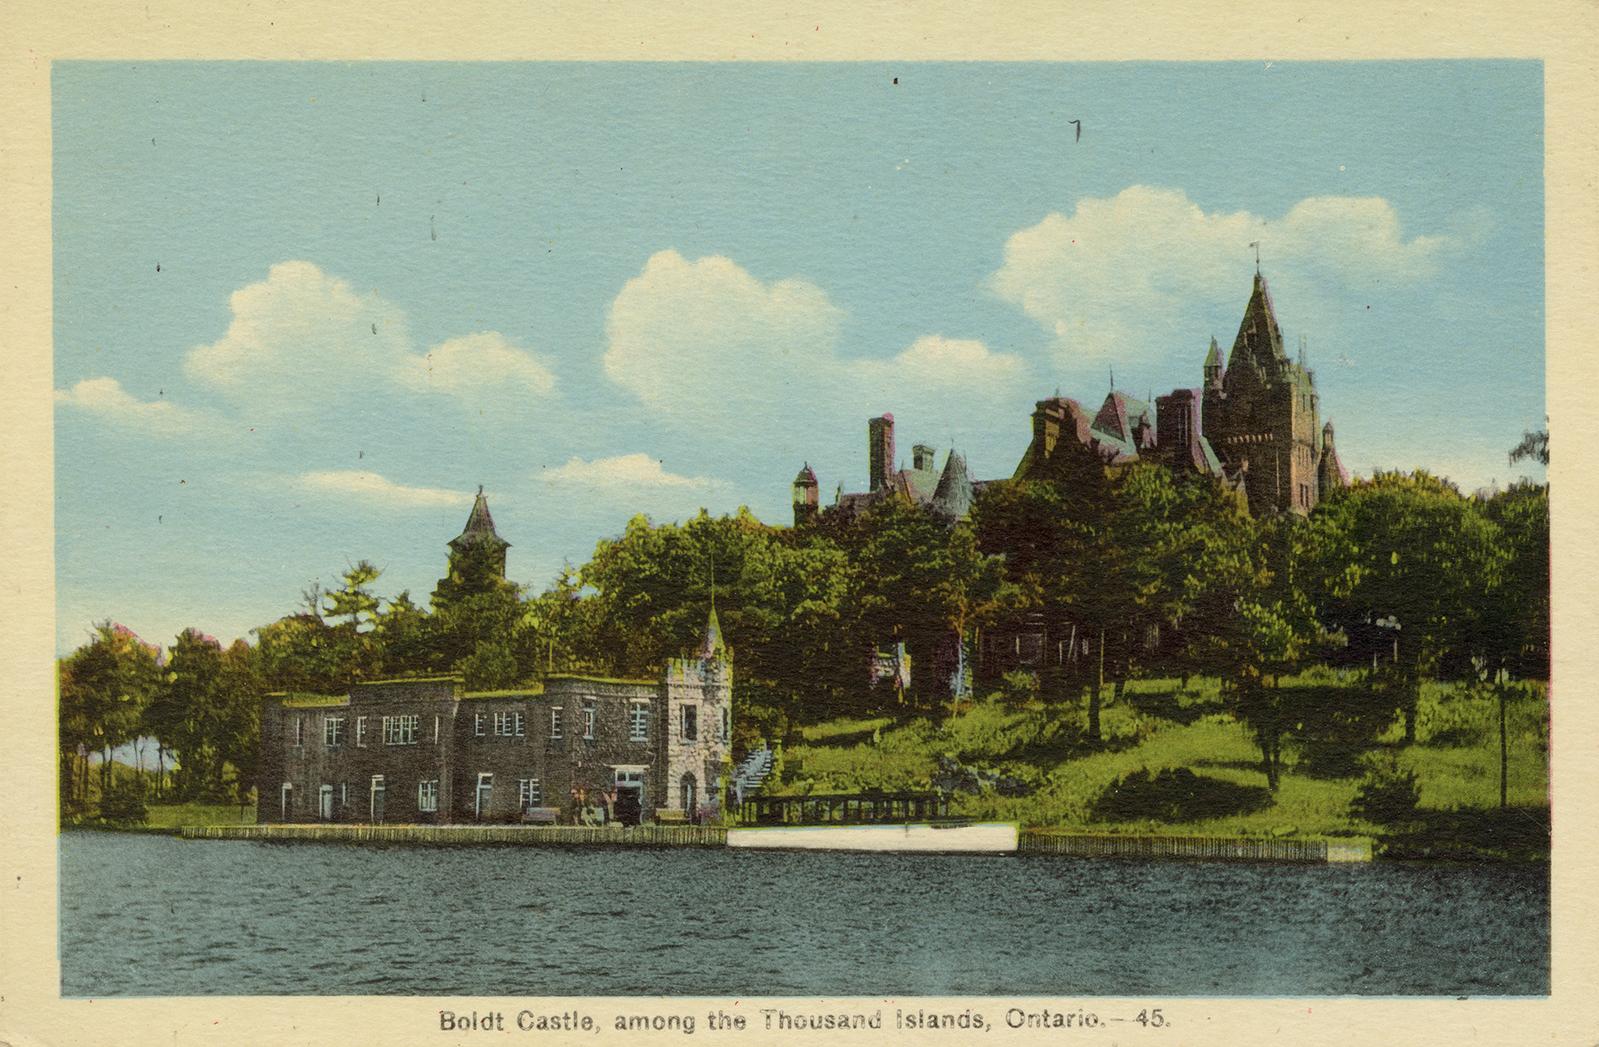 Colorized photograph of a view of a waterway, with a large castle on the river bank.